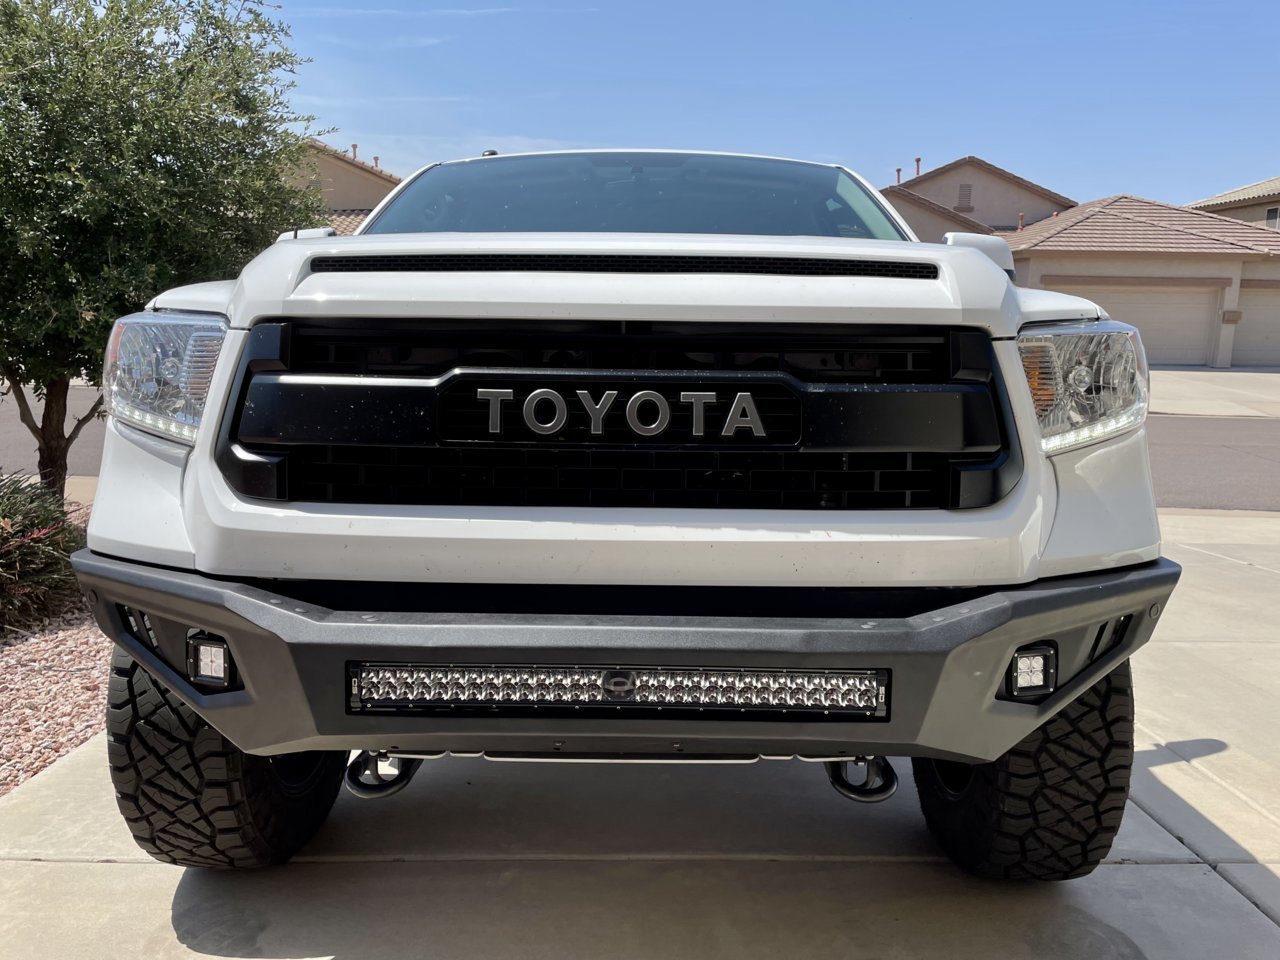 Trd pro and off road/ black steel aftermarket bumpers | Toyota Tundra Forum